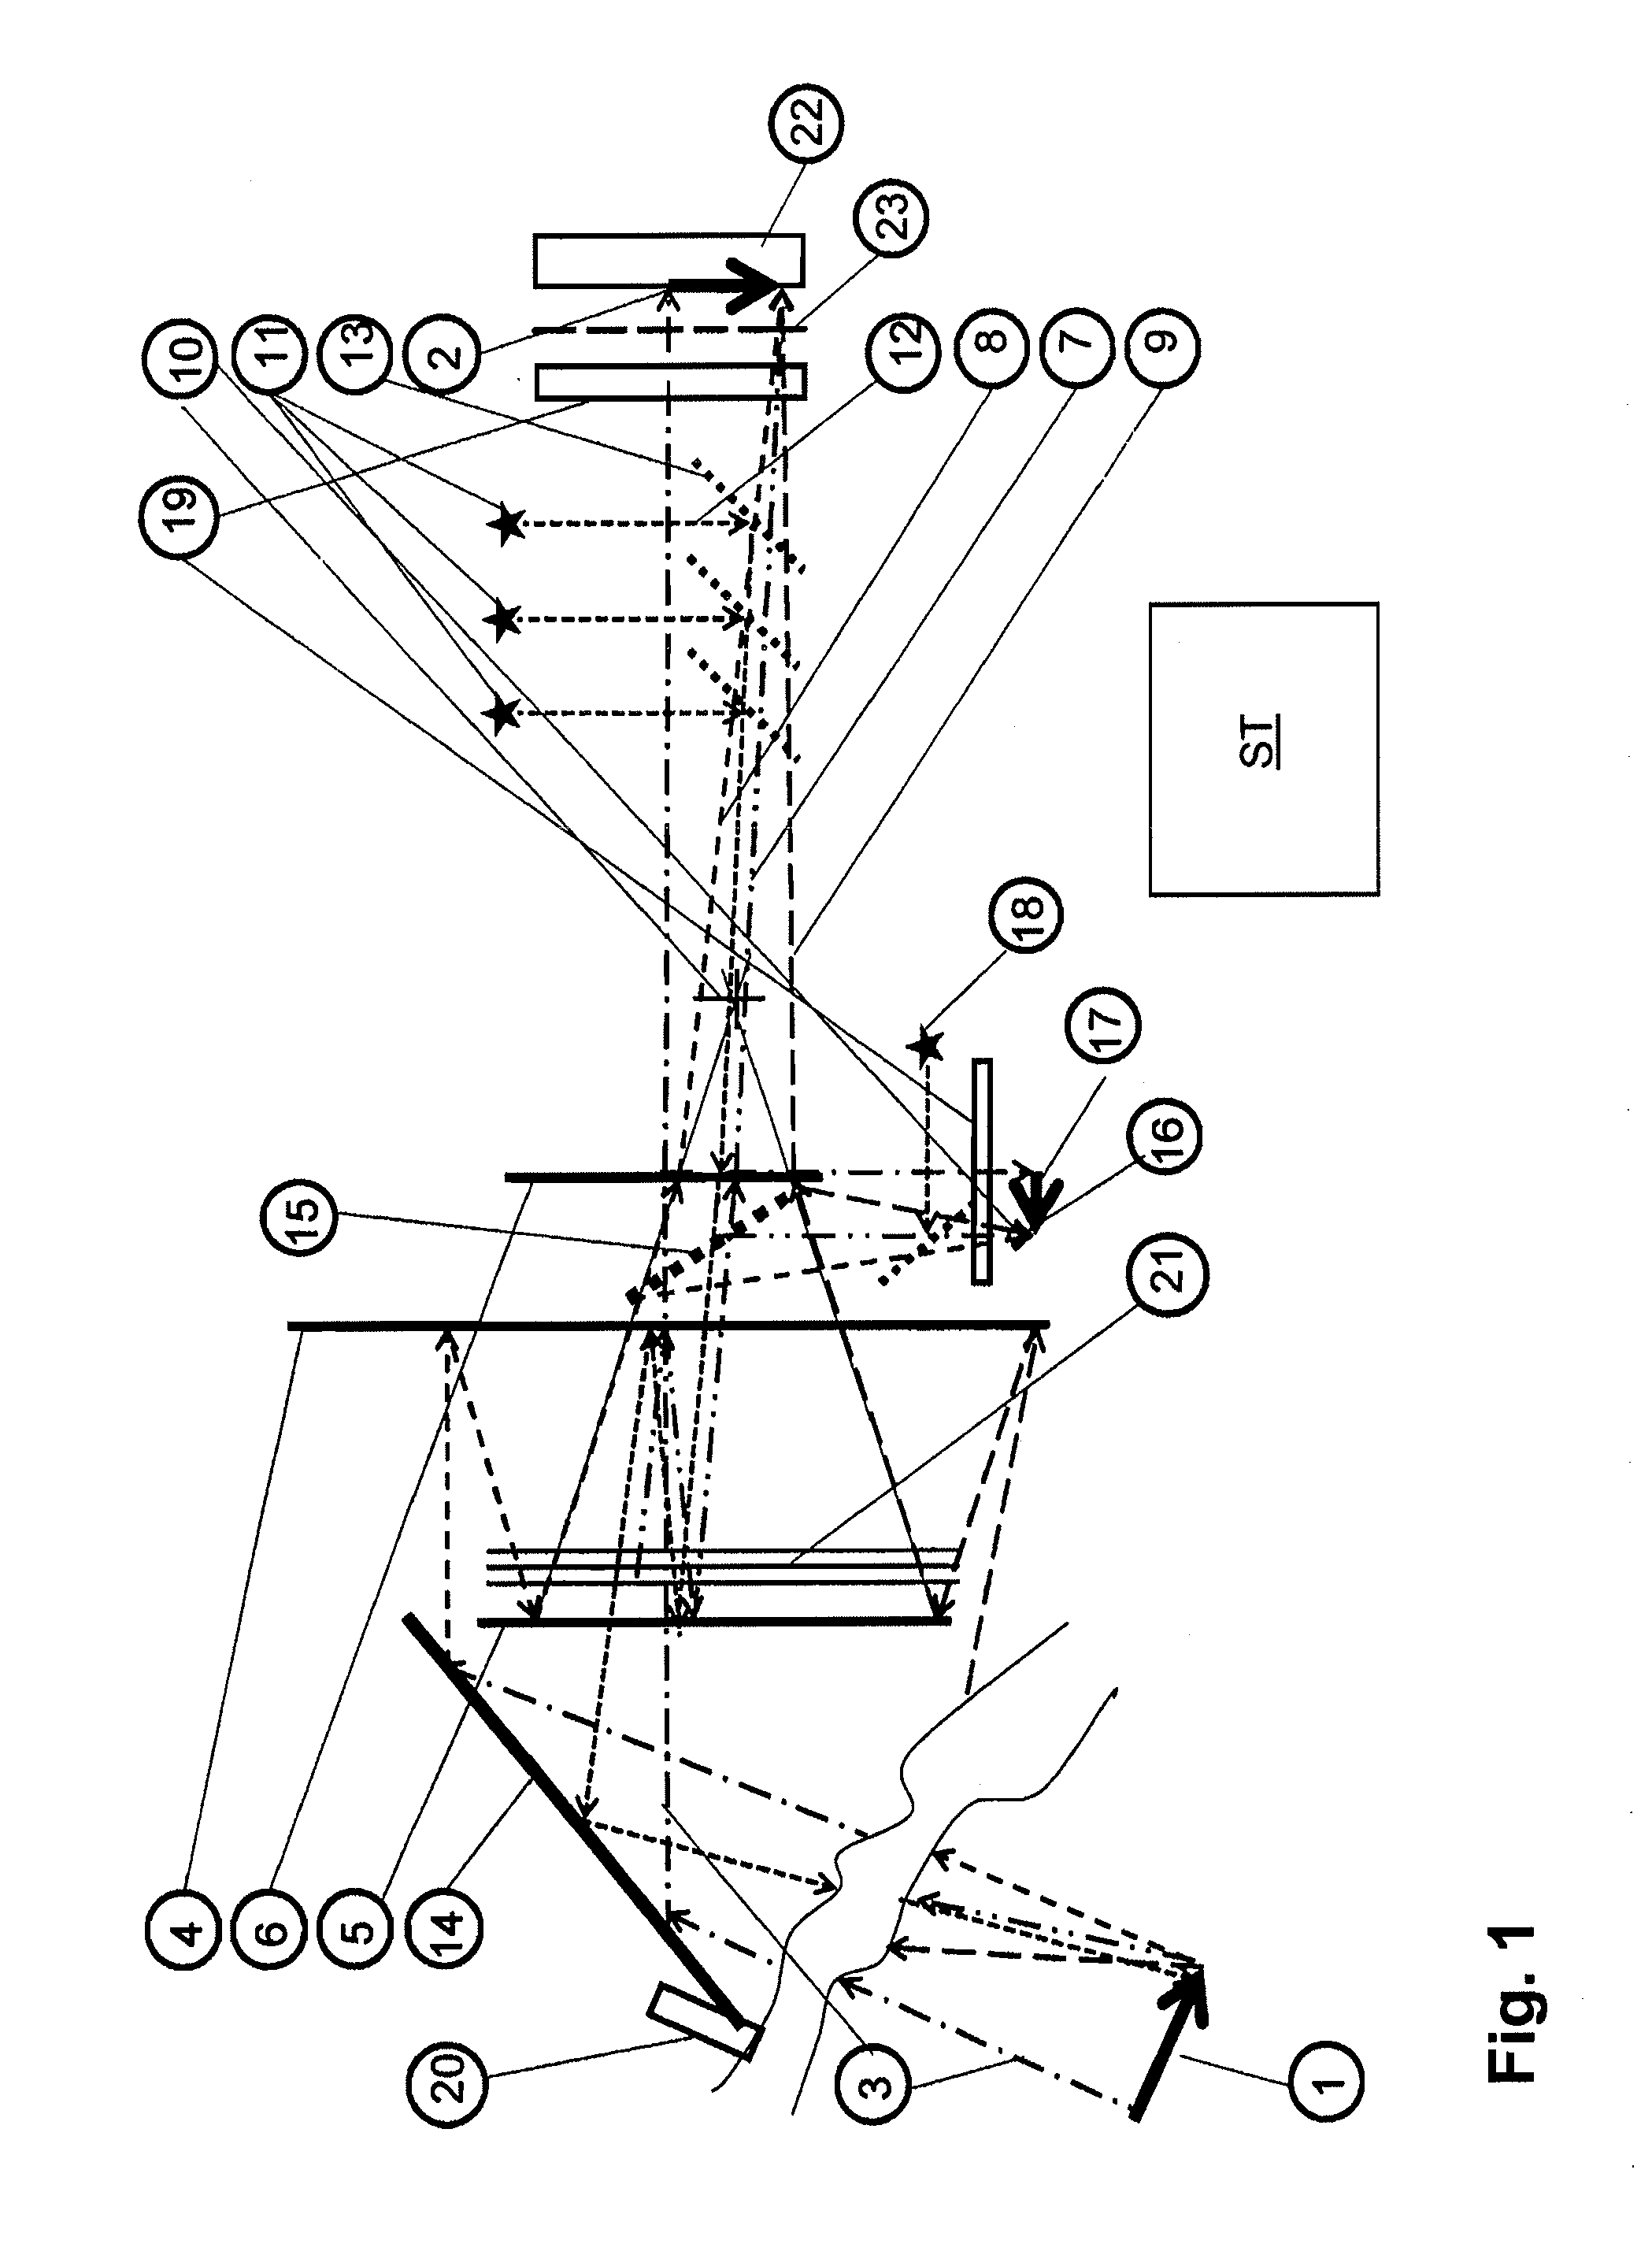 Camera System and Method for Observing Objects at Great Distances, in Particular for Monitoring Target Objects at Night, in Mist, Dust or Rain